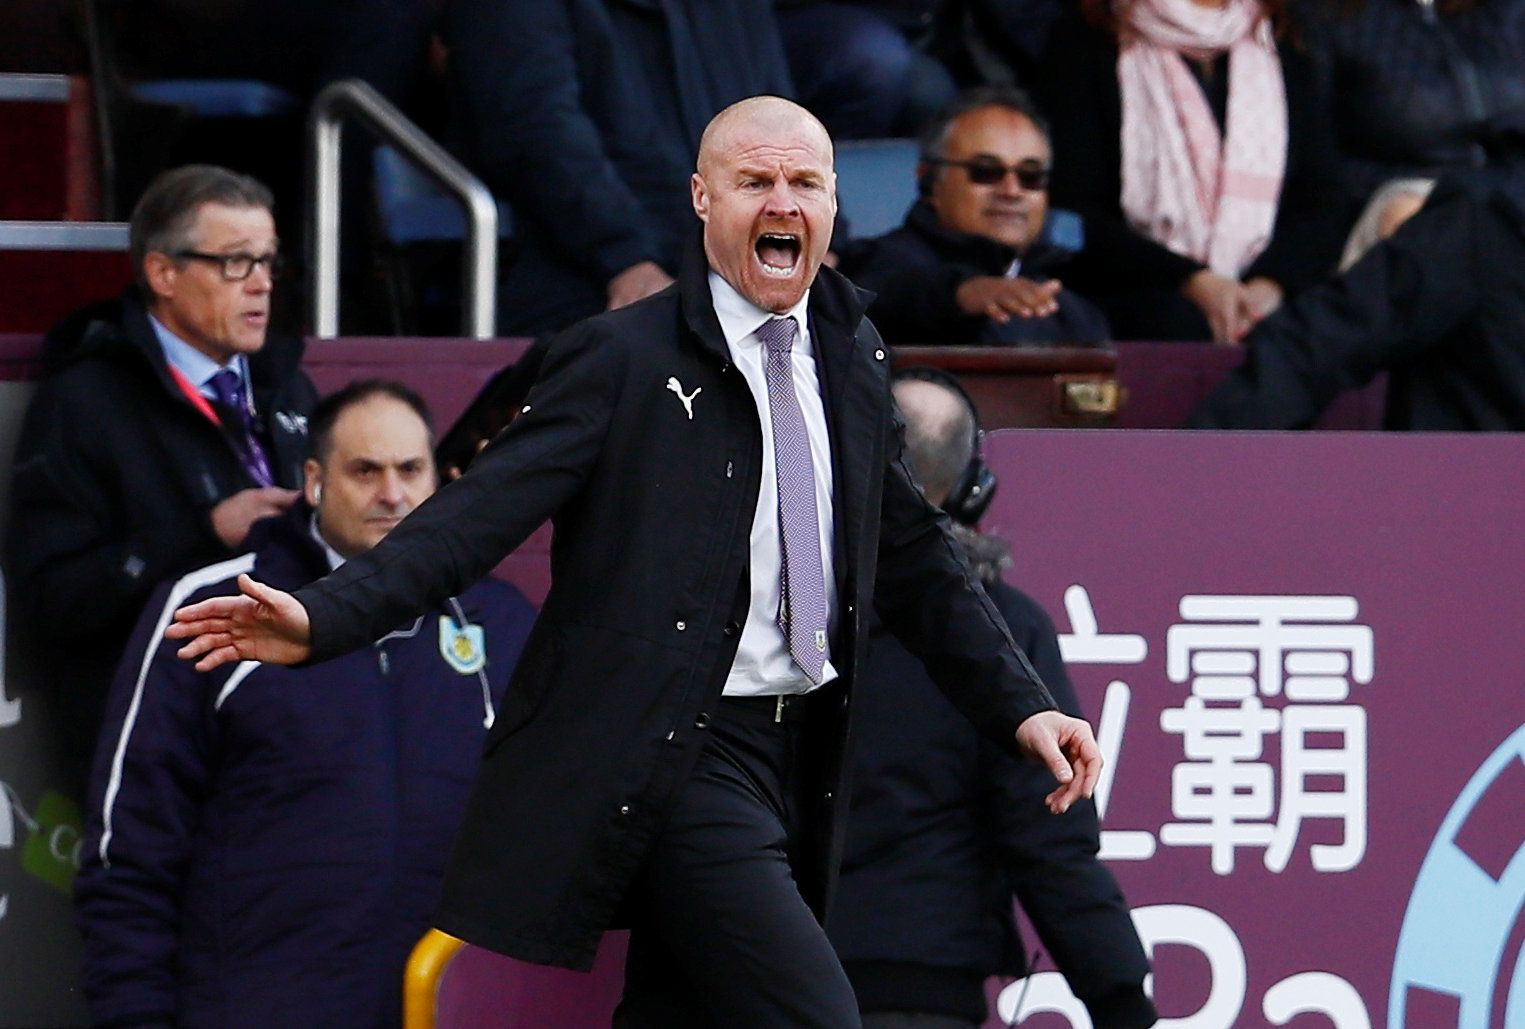 Soccer Football - Premier League - Burnley v Huddersfield Town - Turf Moor, Burnley, Britain - October 6, 2018  Burnley manager Sean Dyche reacts during the match                Action Images via Reuters/Jason Cairnduff  EDITORIAL USE ONLY. No use with unauthorized audio, video, data, fixture lists, club/league logos or "live" services. Online in-match use limited to 75 images, no video emulation. No use in betting, games or single club/league/player publications.  Please contact your account re